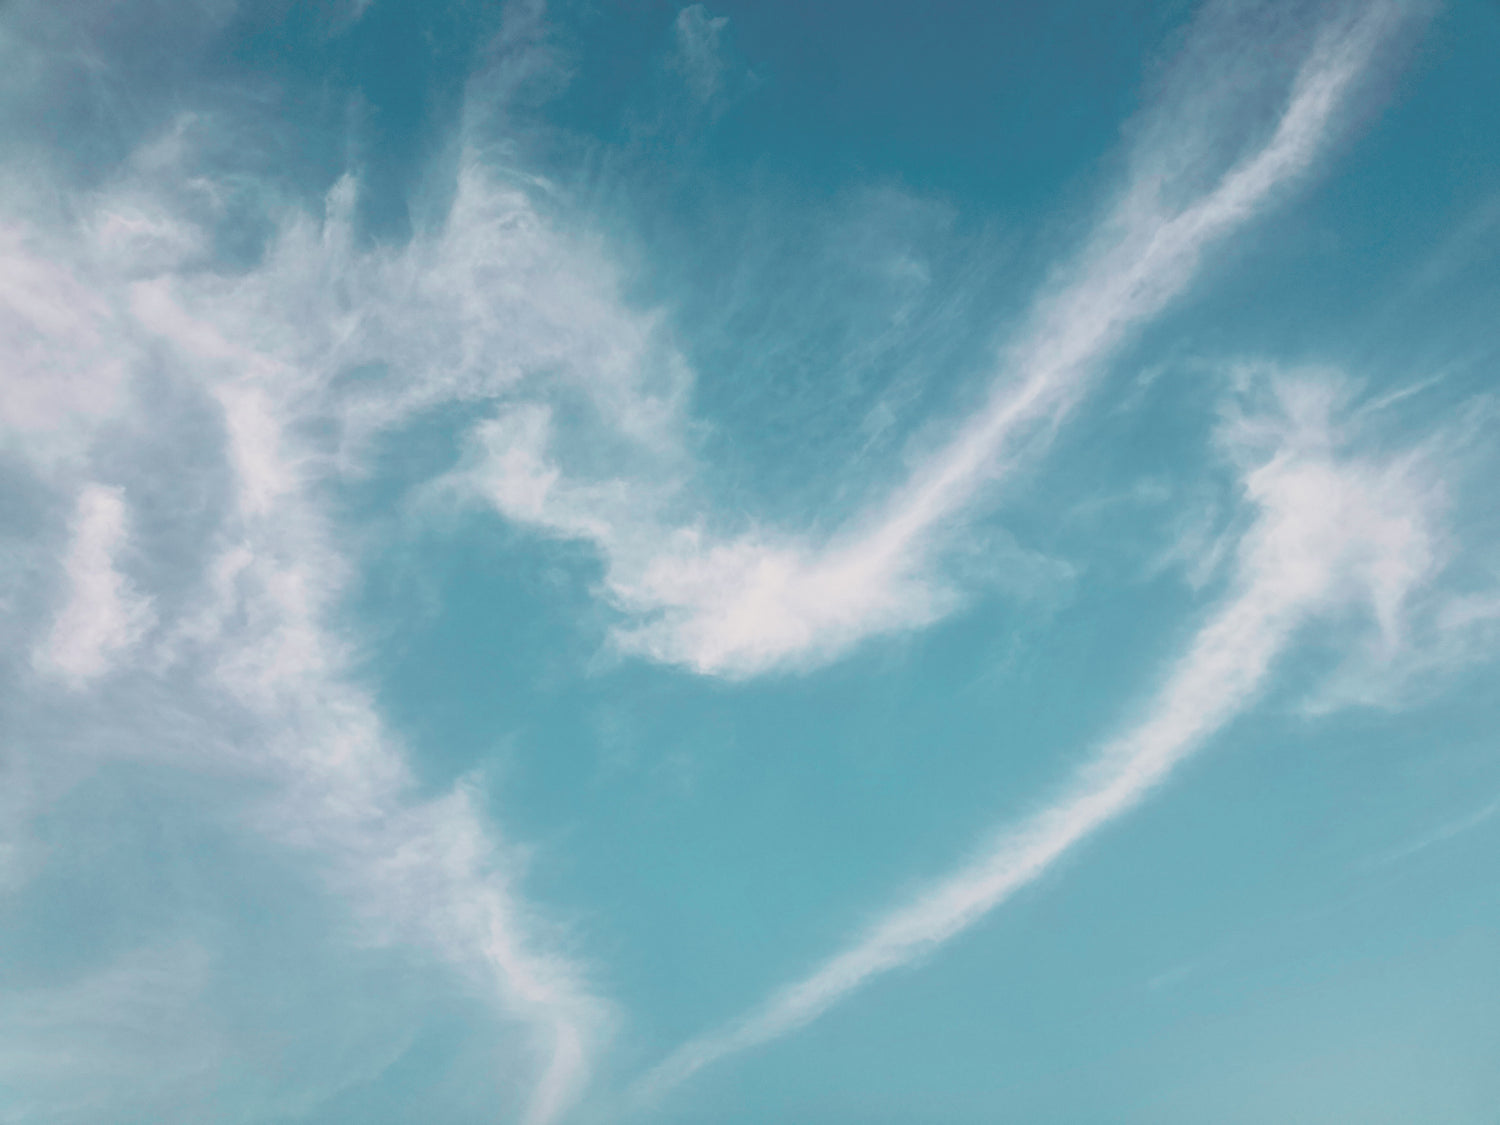 CLOUDS-FORM-HEART-IN-THE-SKY